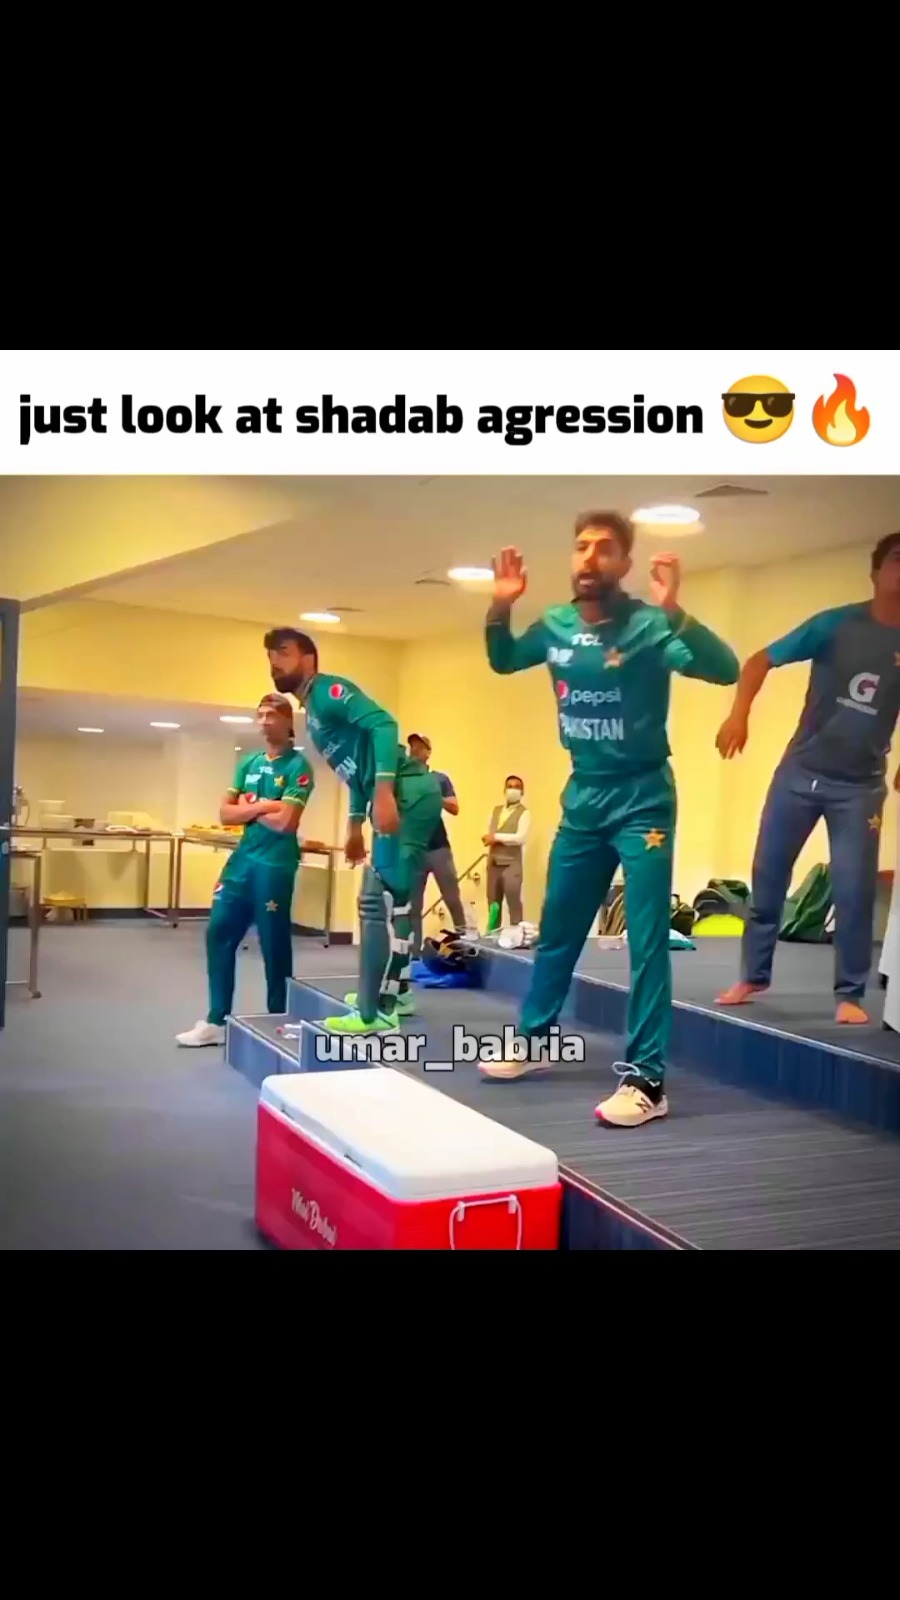 Guys look at the agression of shadab 🔥😎💪